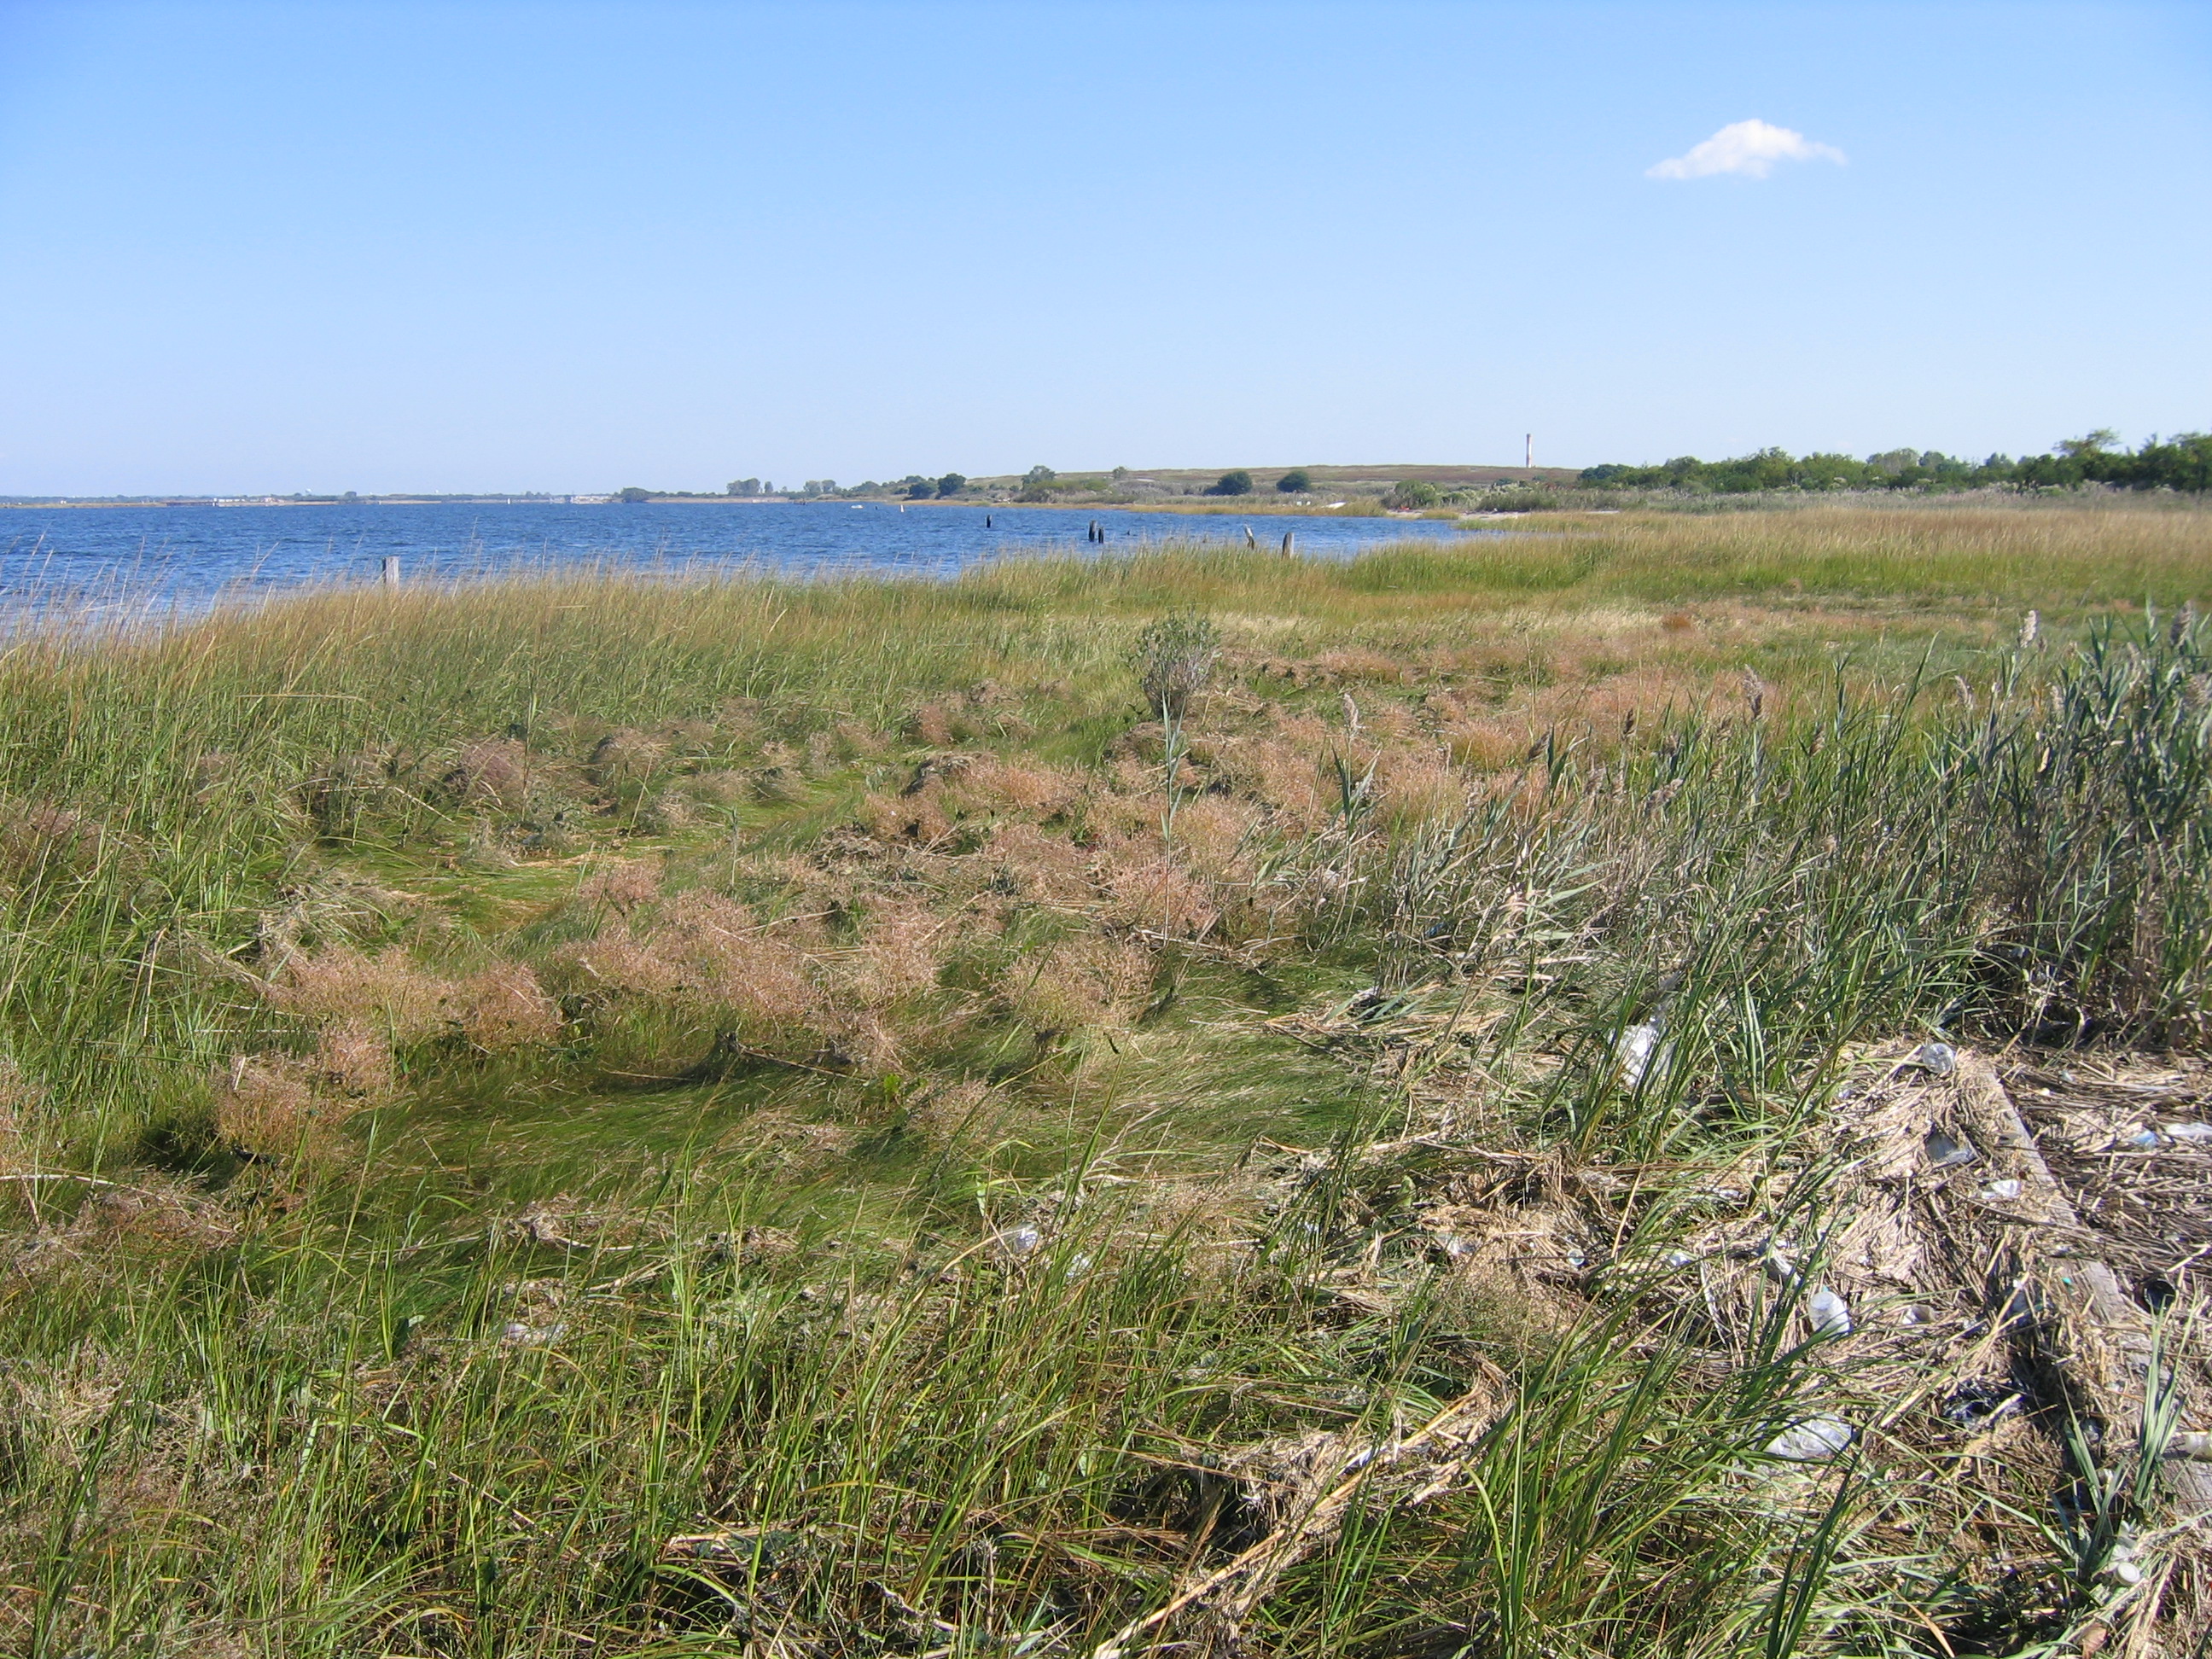 The Salt Marsh of Dubos Point. Photo: Marielle Anzelone